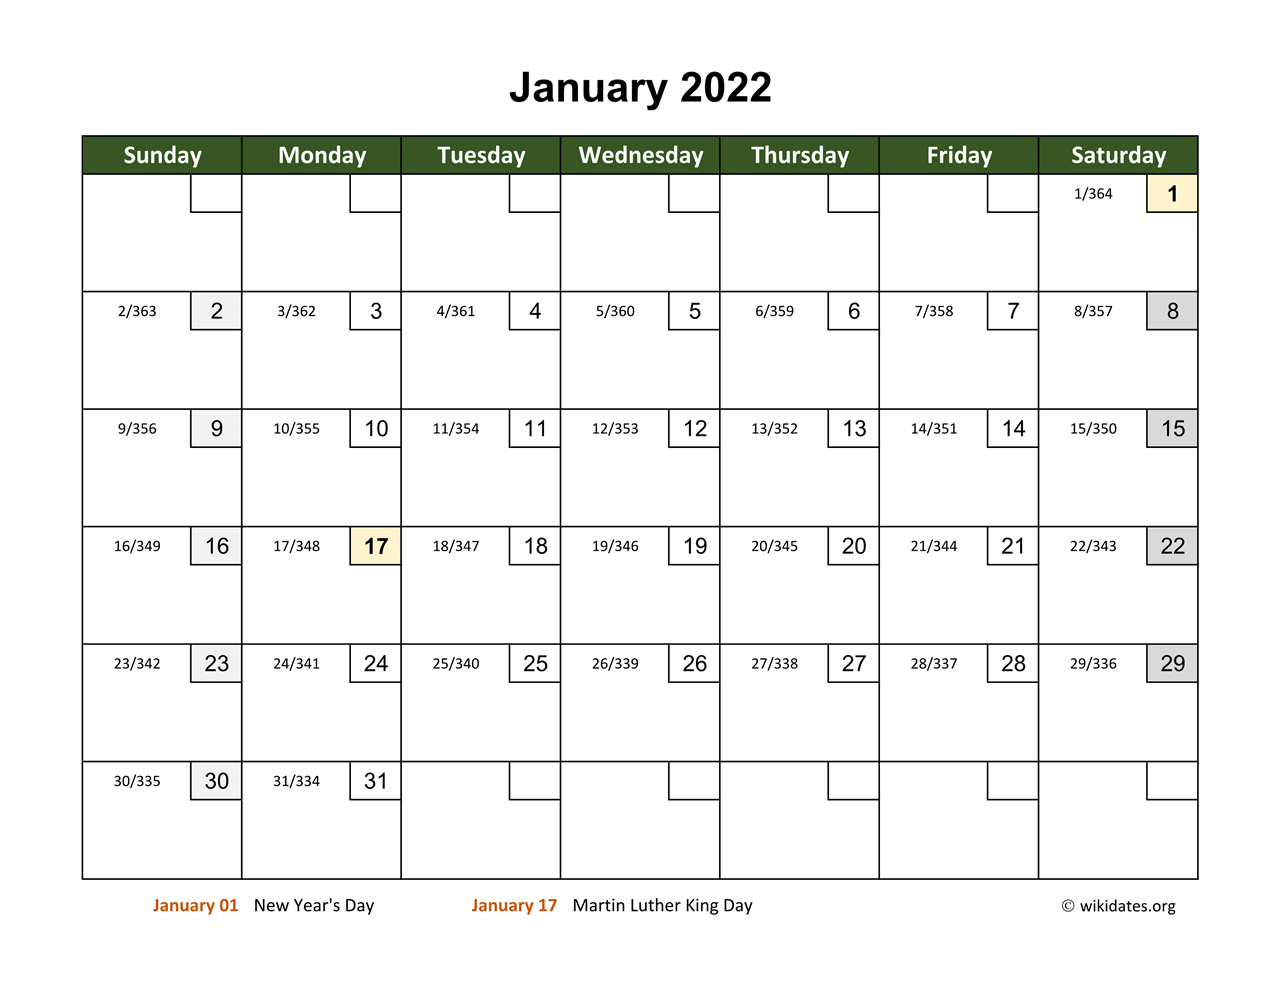 Day Of The Year Calendar 2022 Monthly 2022 Calendar With Day Numbers | Wikidates.org